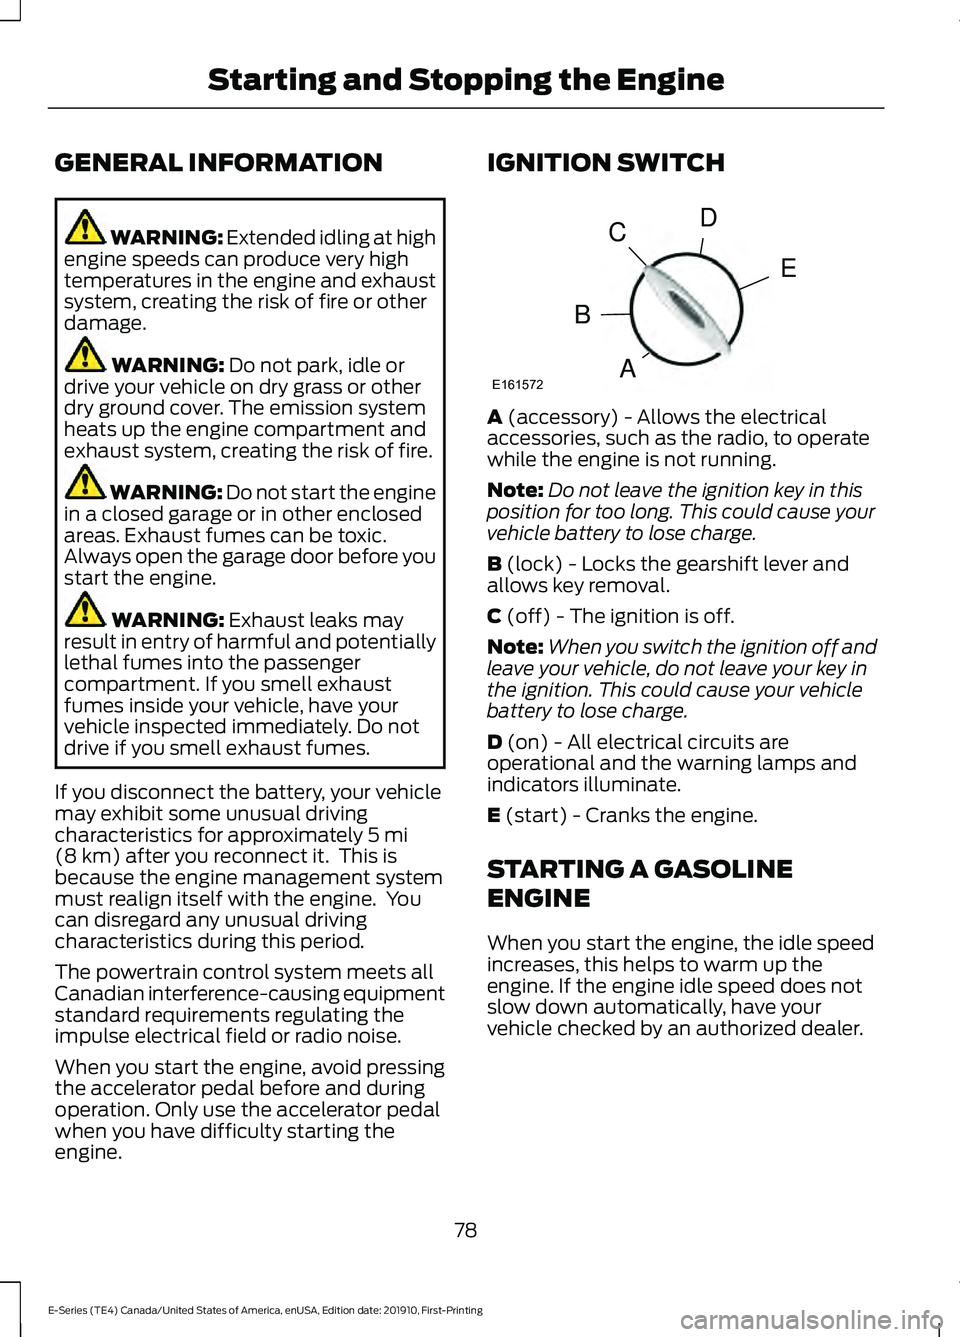 FORD E-450 2021  Owners Manual GENERAL INFORMATION
WARNING: Extended idling at high
engine speeds can produce very high
temperatures in the engine and exhaust
system, creating the risk of fire or other
damage. WARNING: 
Do not park